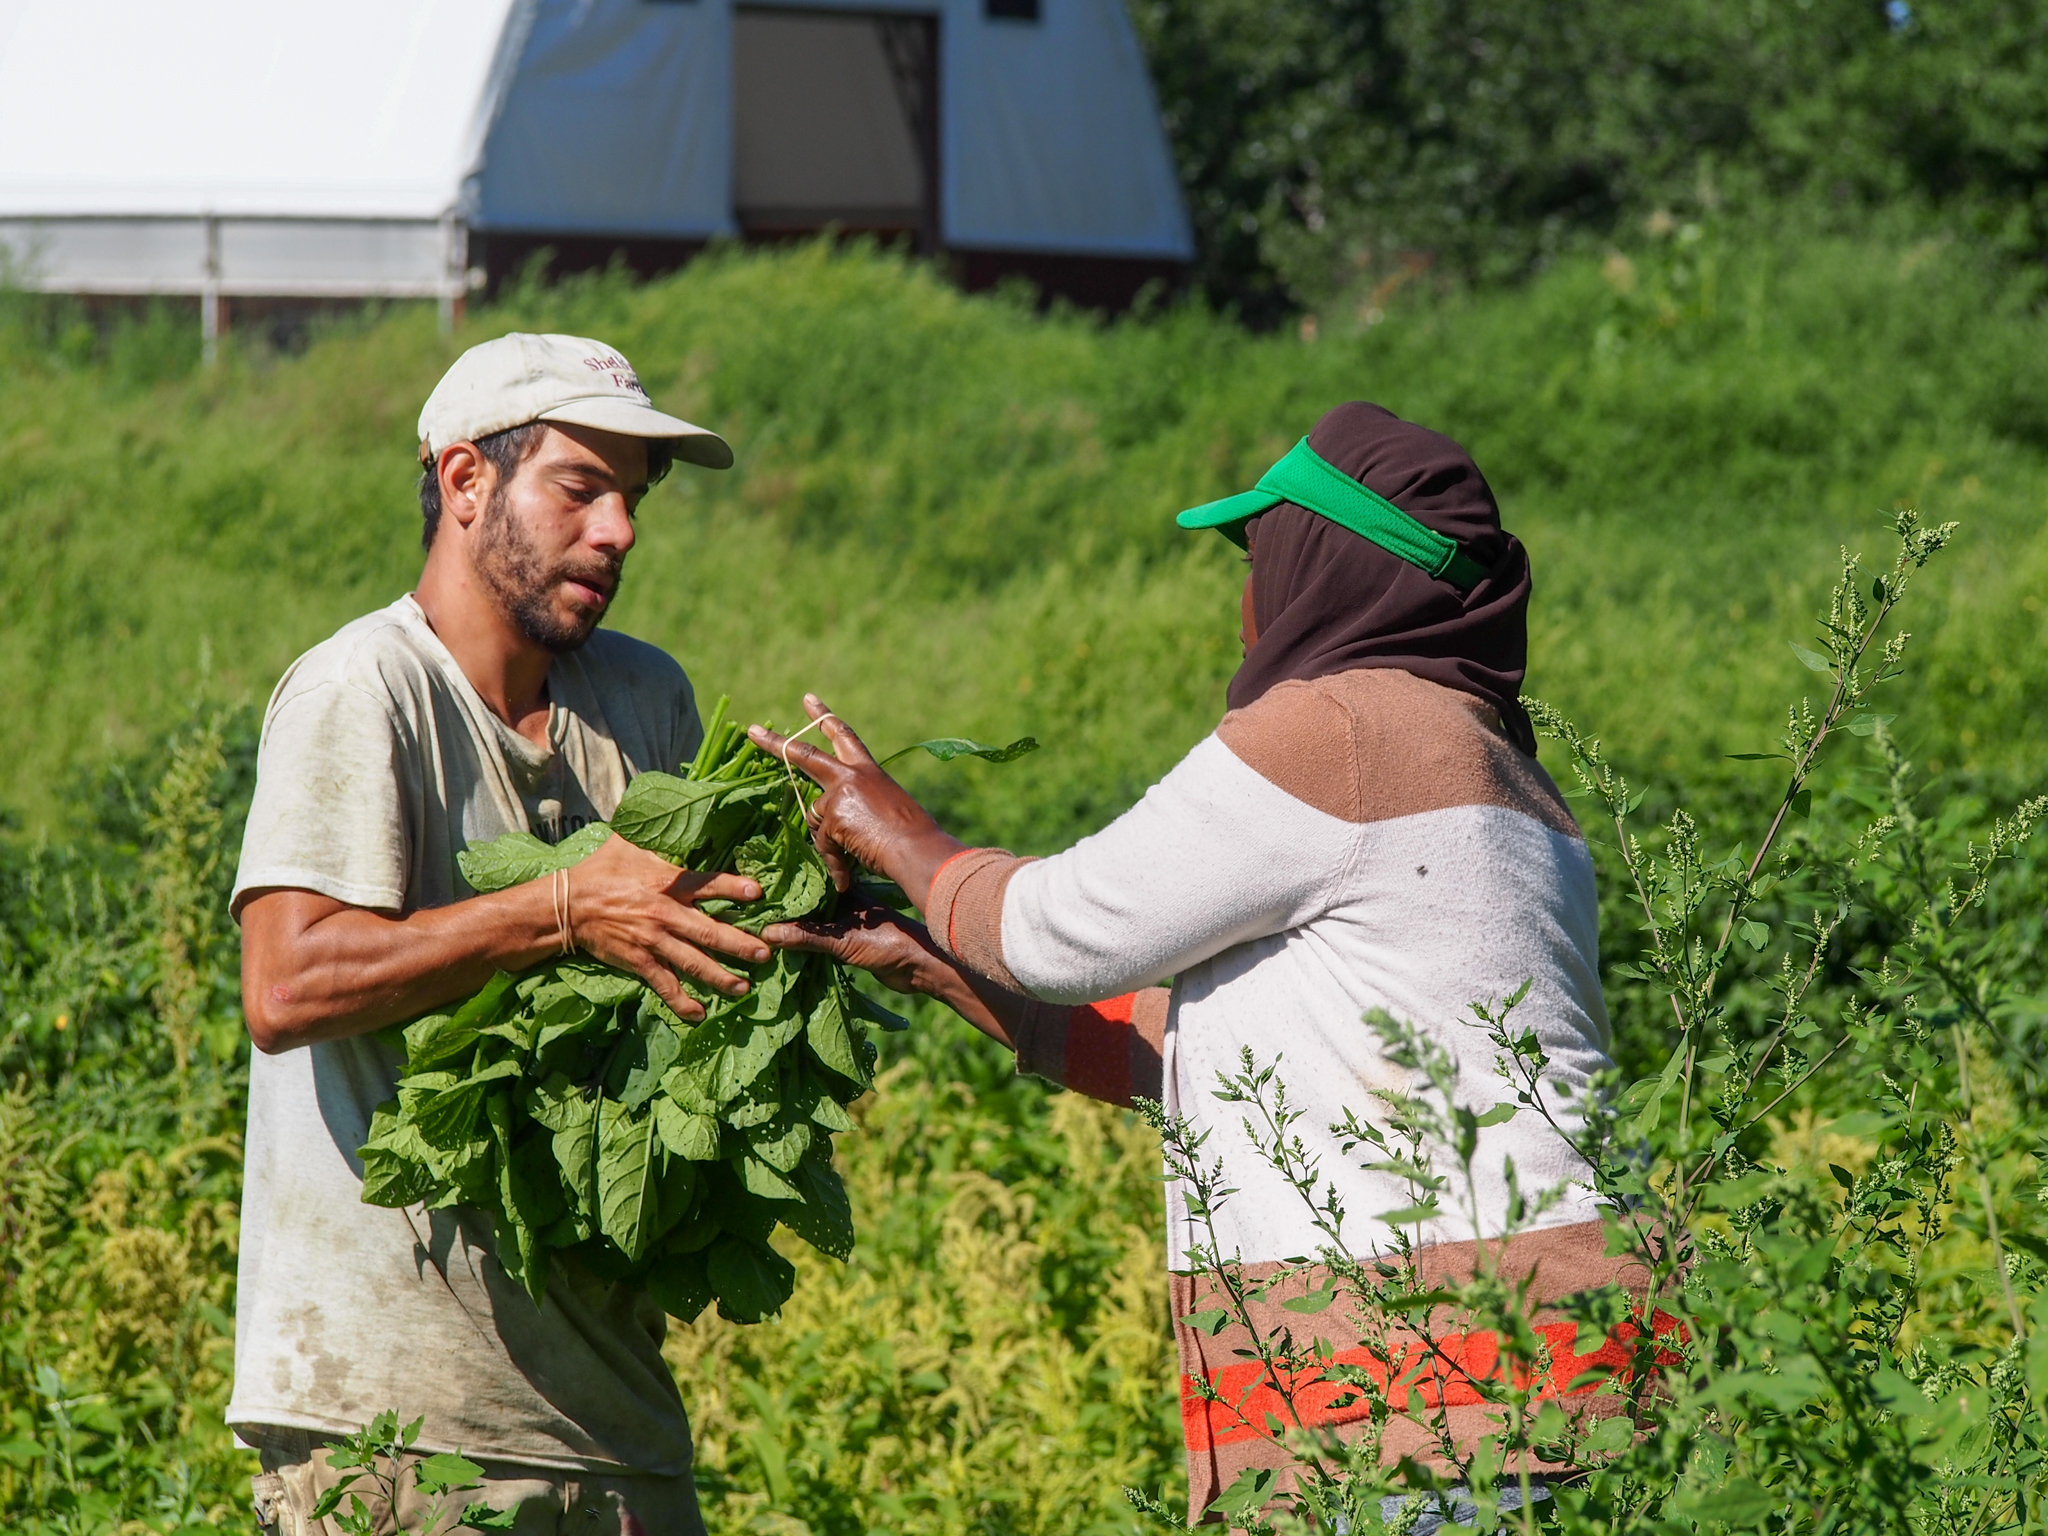 Nour El-Naboulsi and Hyacinthe Mahoro bunch up mulukhiyah at Pine Island Community Farm in Colchester, VT.